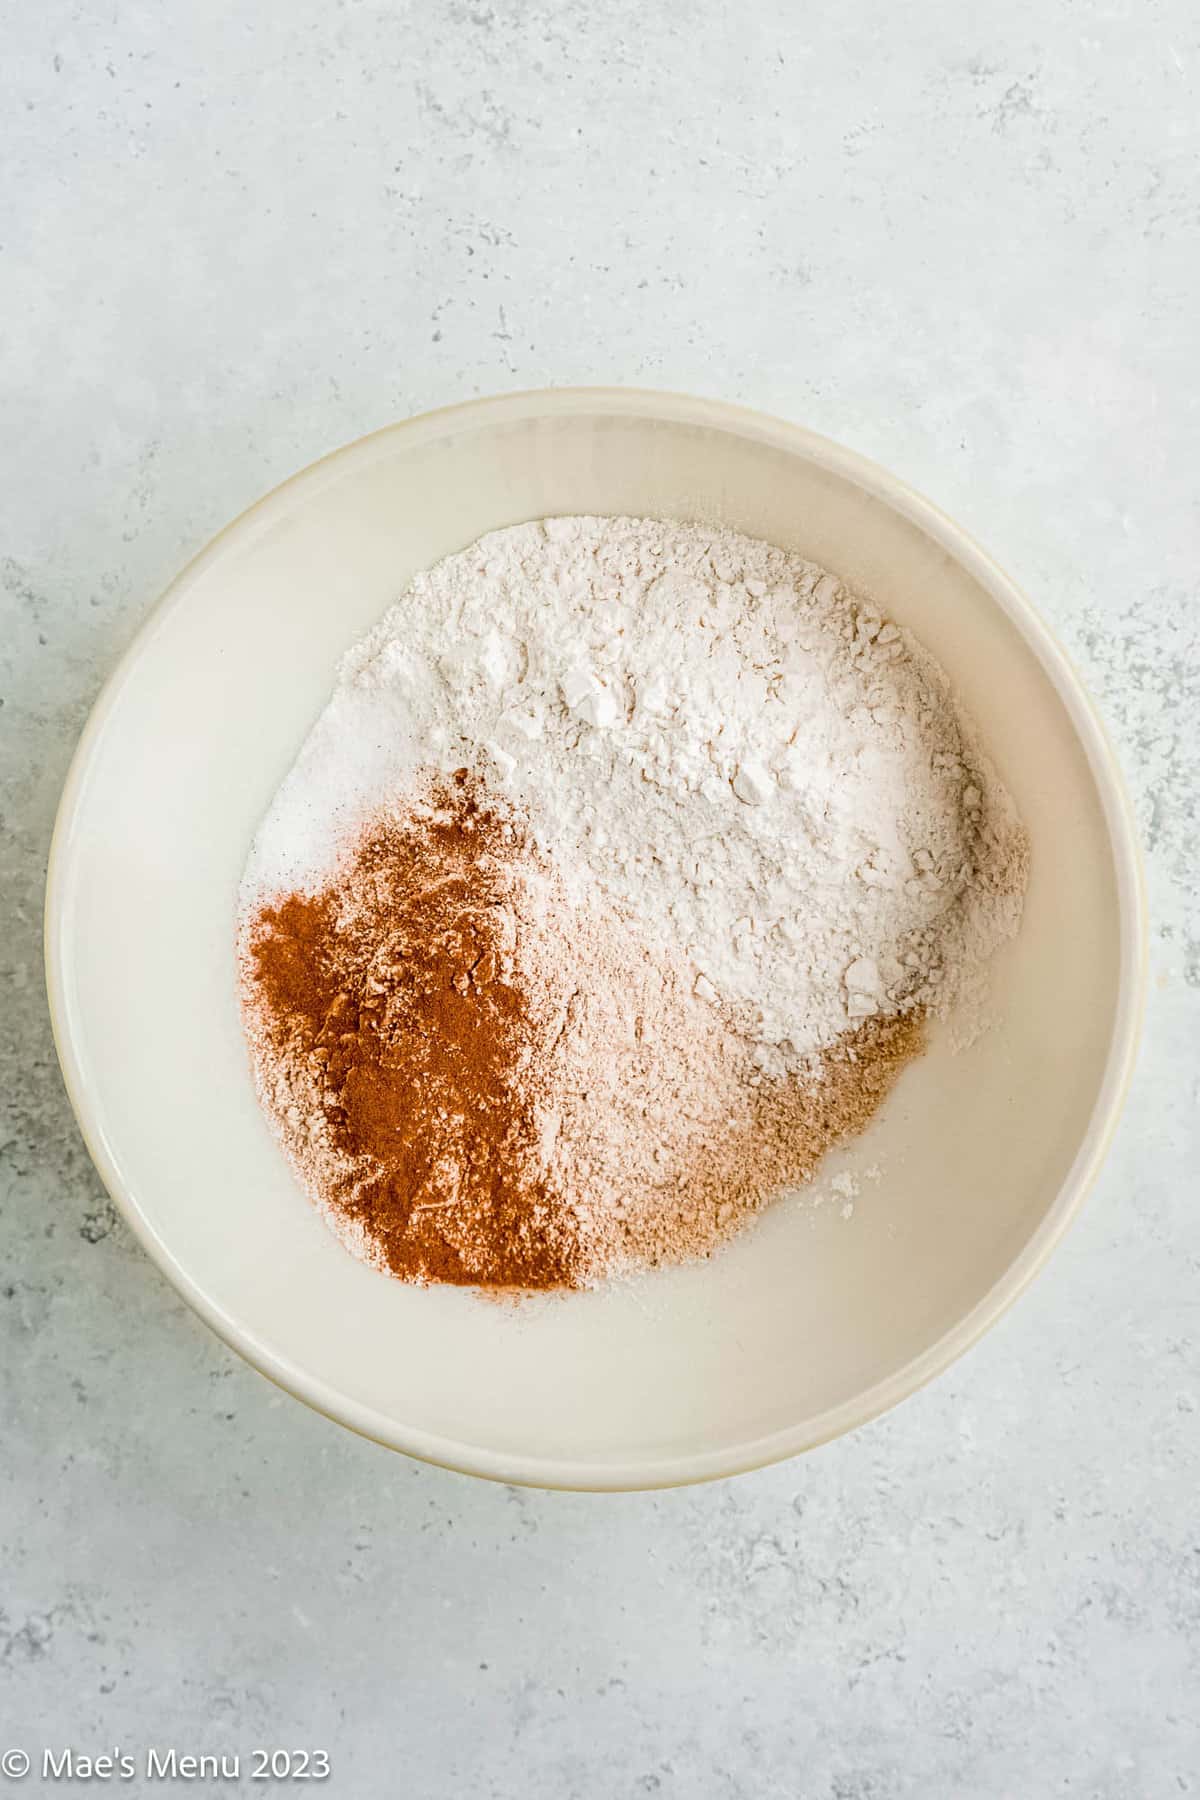 A large mixing bowl of flour, ground walnuts, cinnamon, and salt.